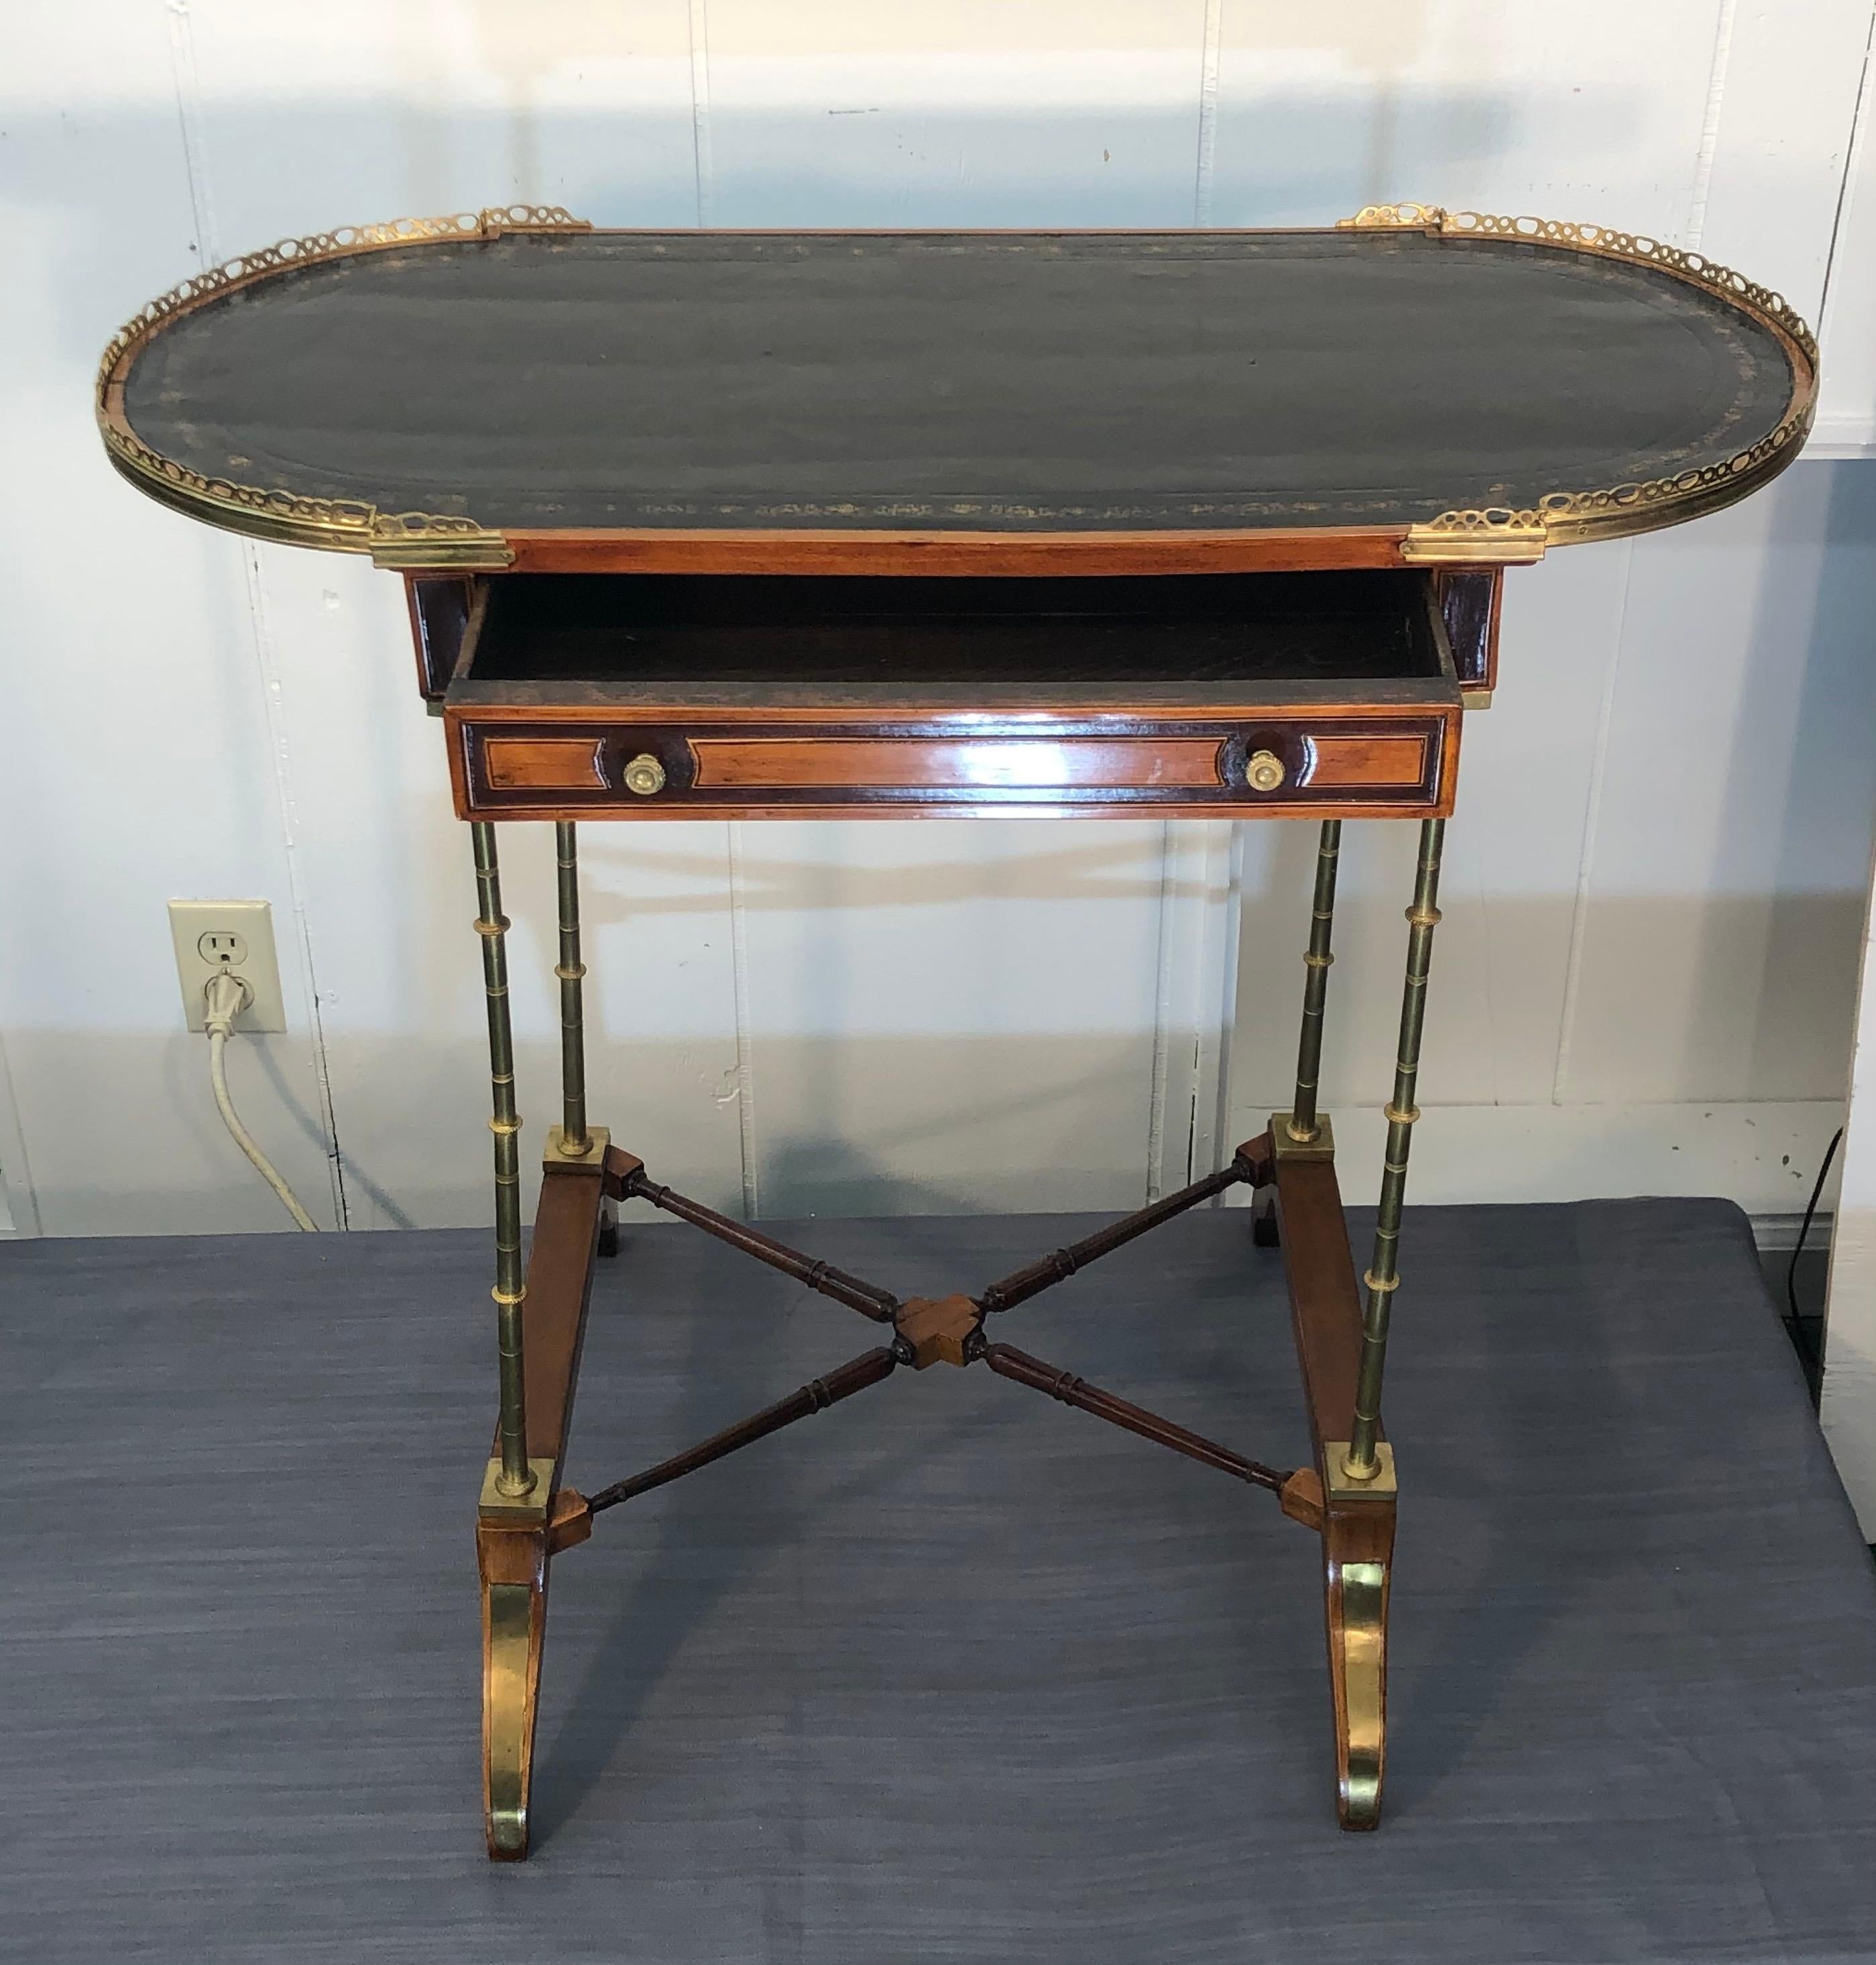 Signed Adam Weisweiler Neoclassical Table With Faux Bamboo Columns, 18th Century 5